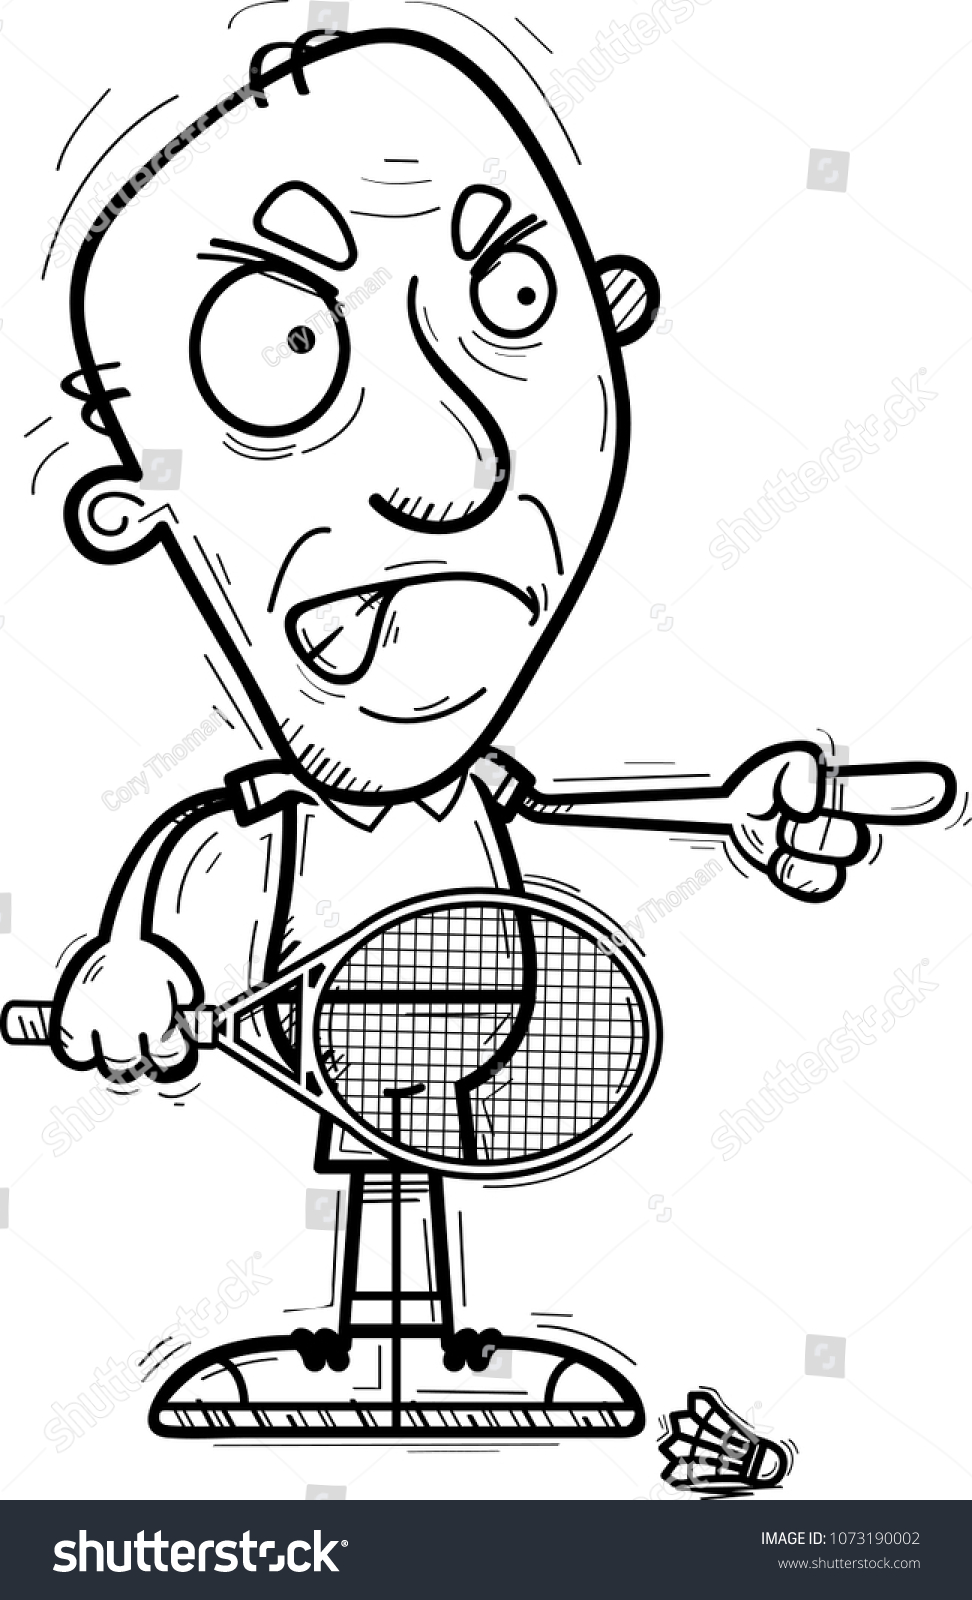 A cartoon illustration of a senior citizen man badminton player looking angry and pointing. #1073190002